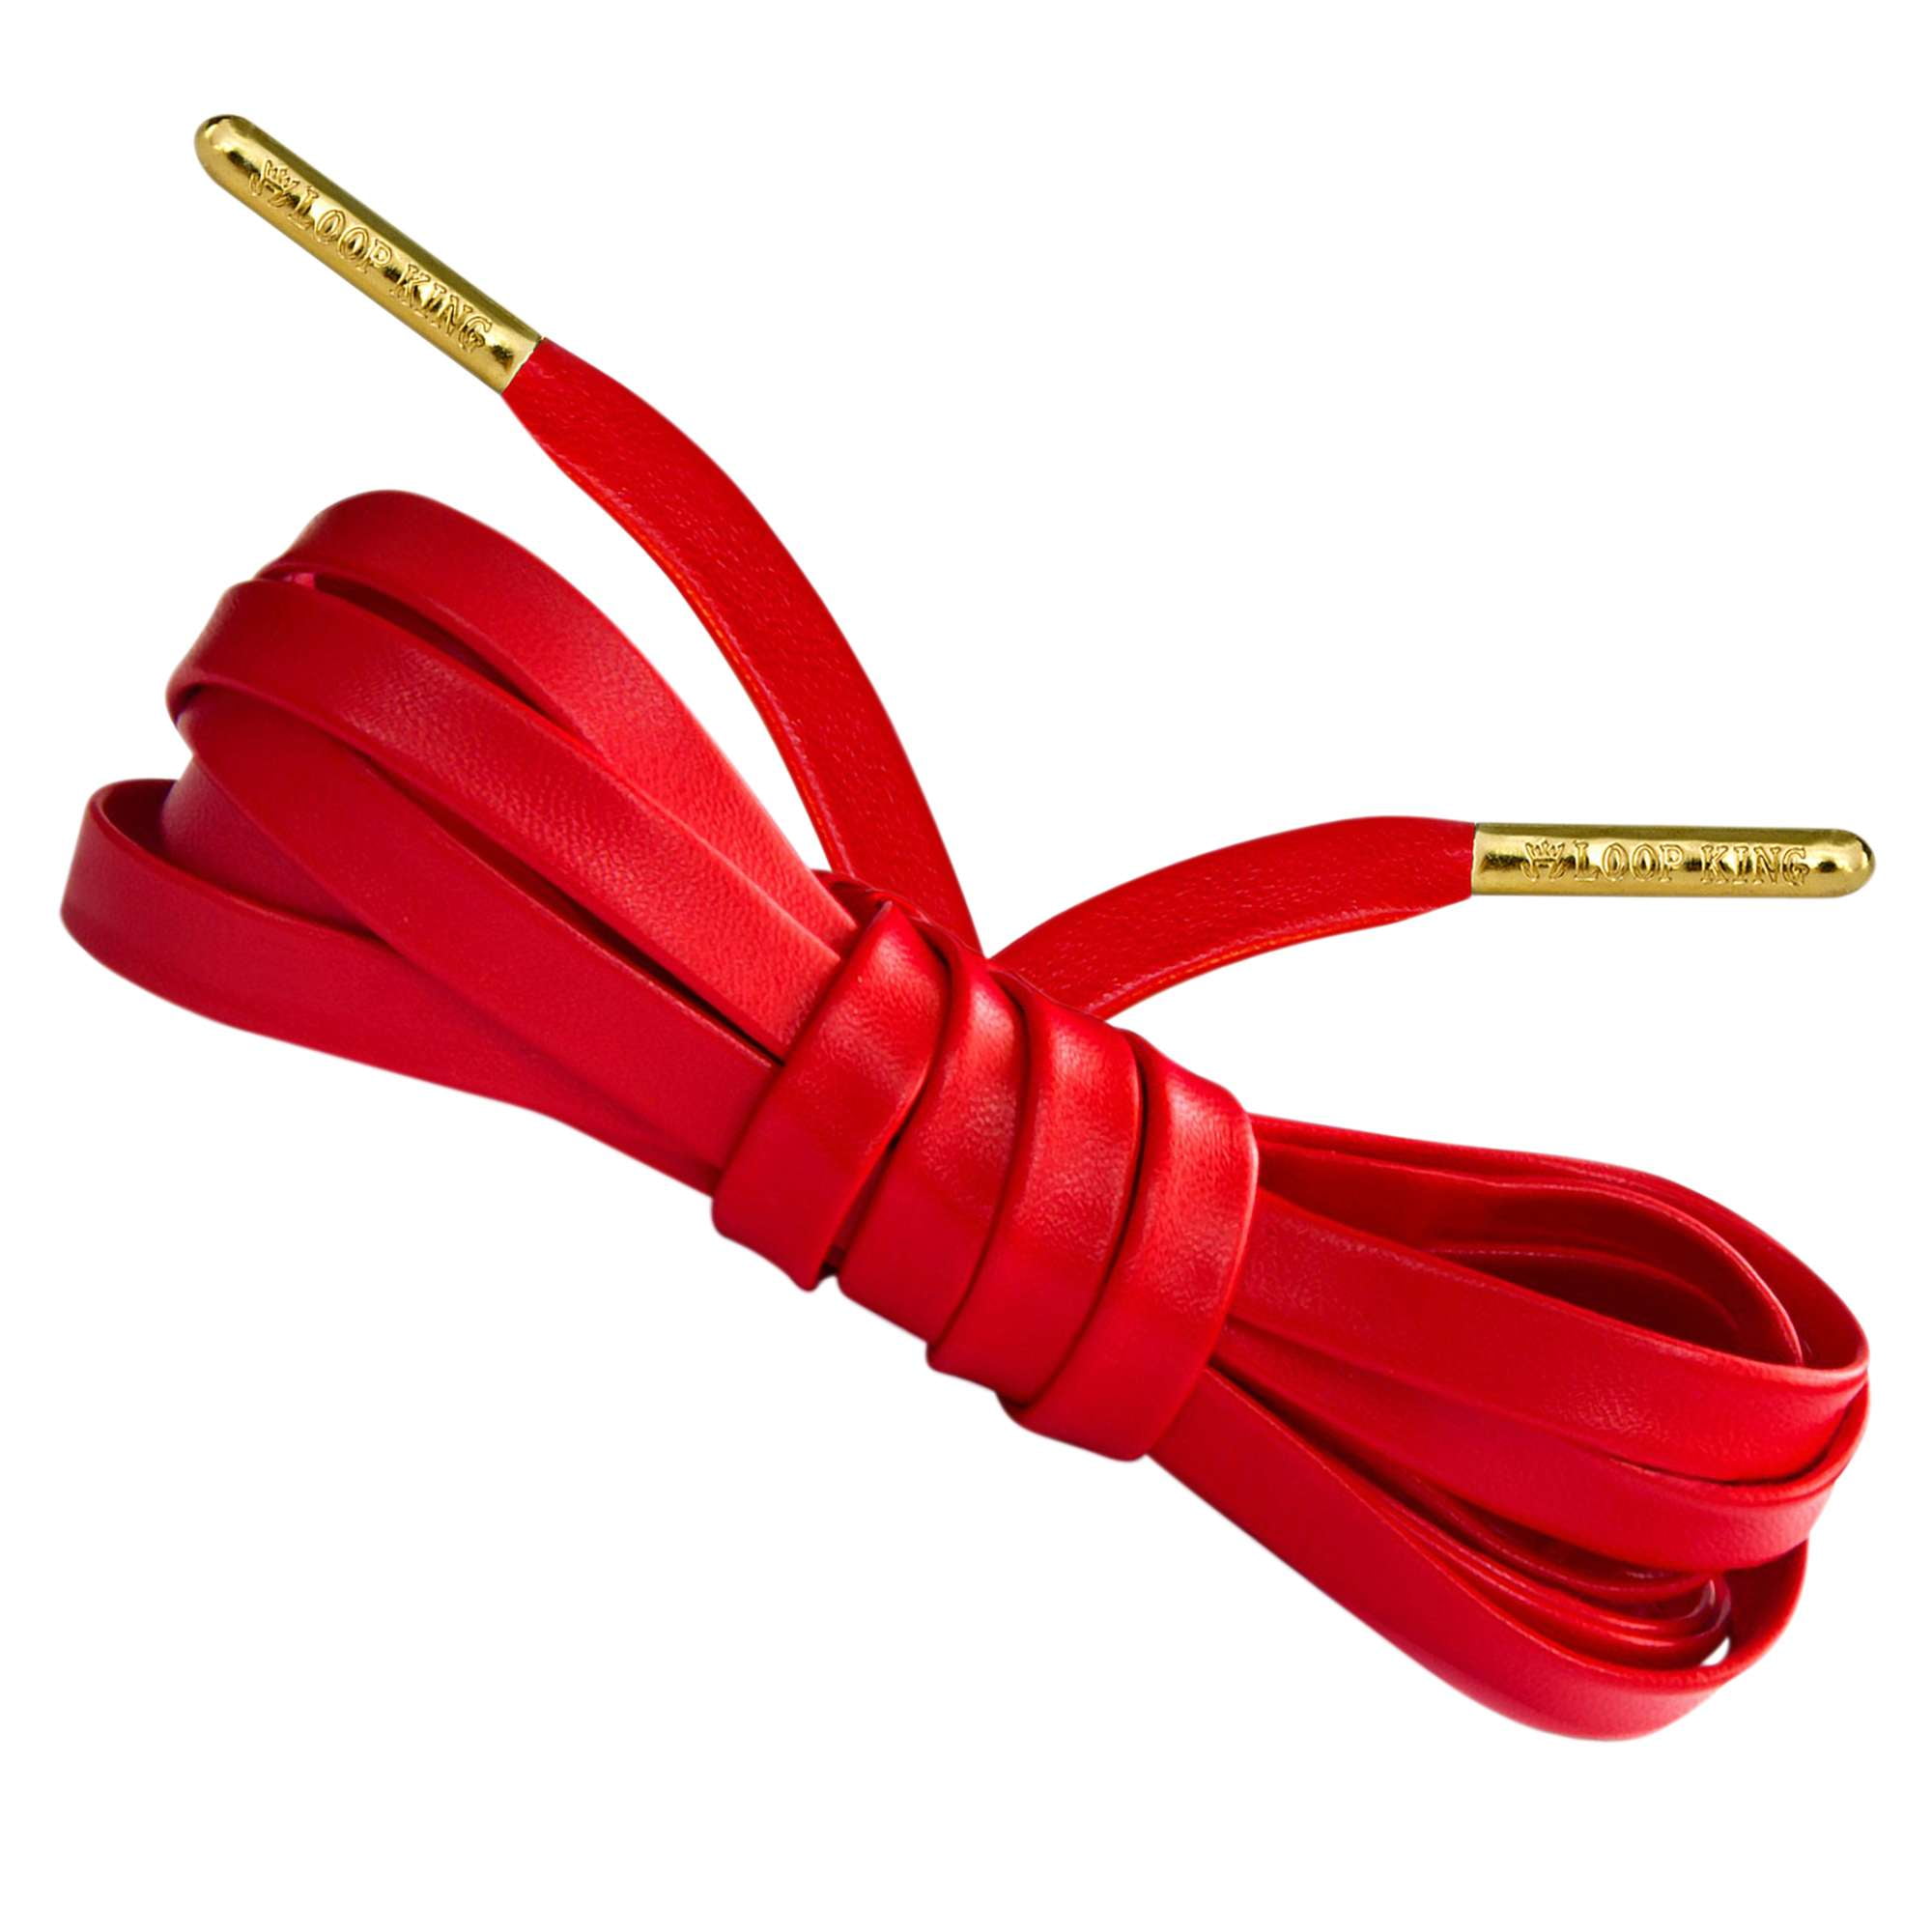 Loop King Smart Leather Laces embossed golden aglet SOLD IN PAIRS